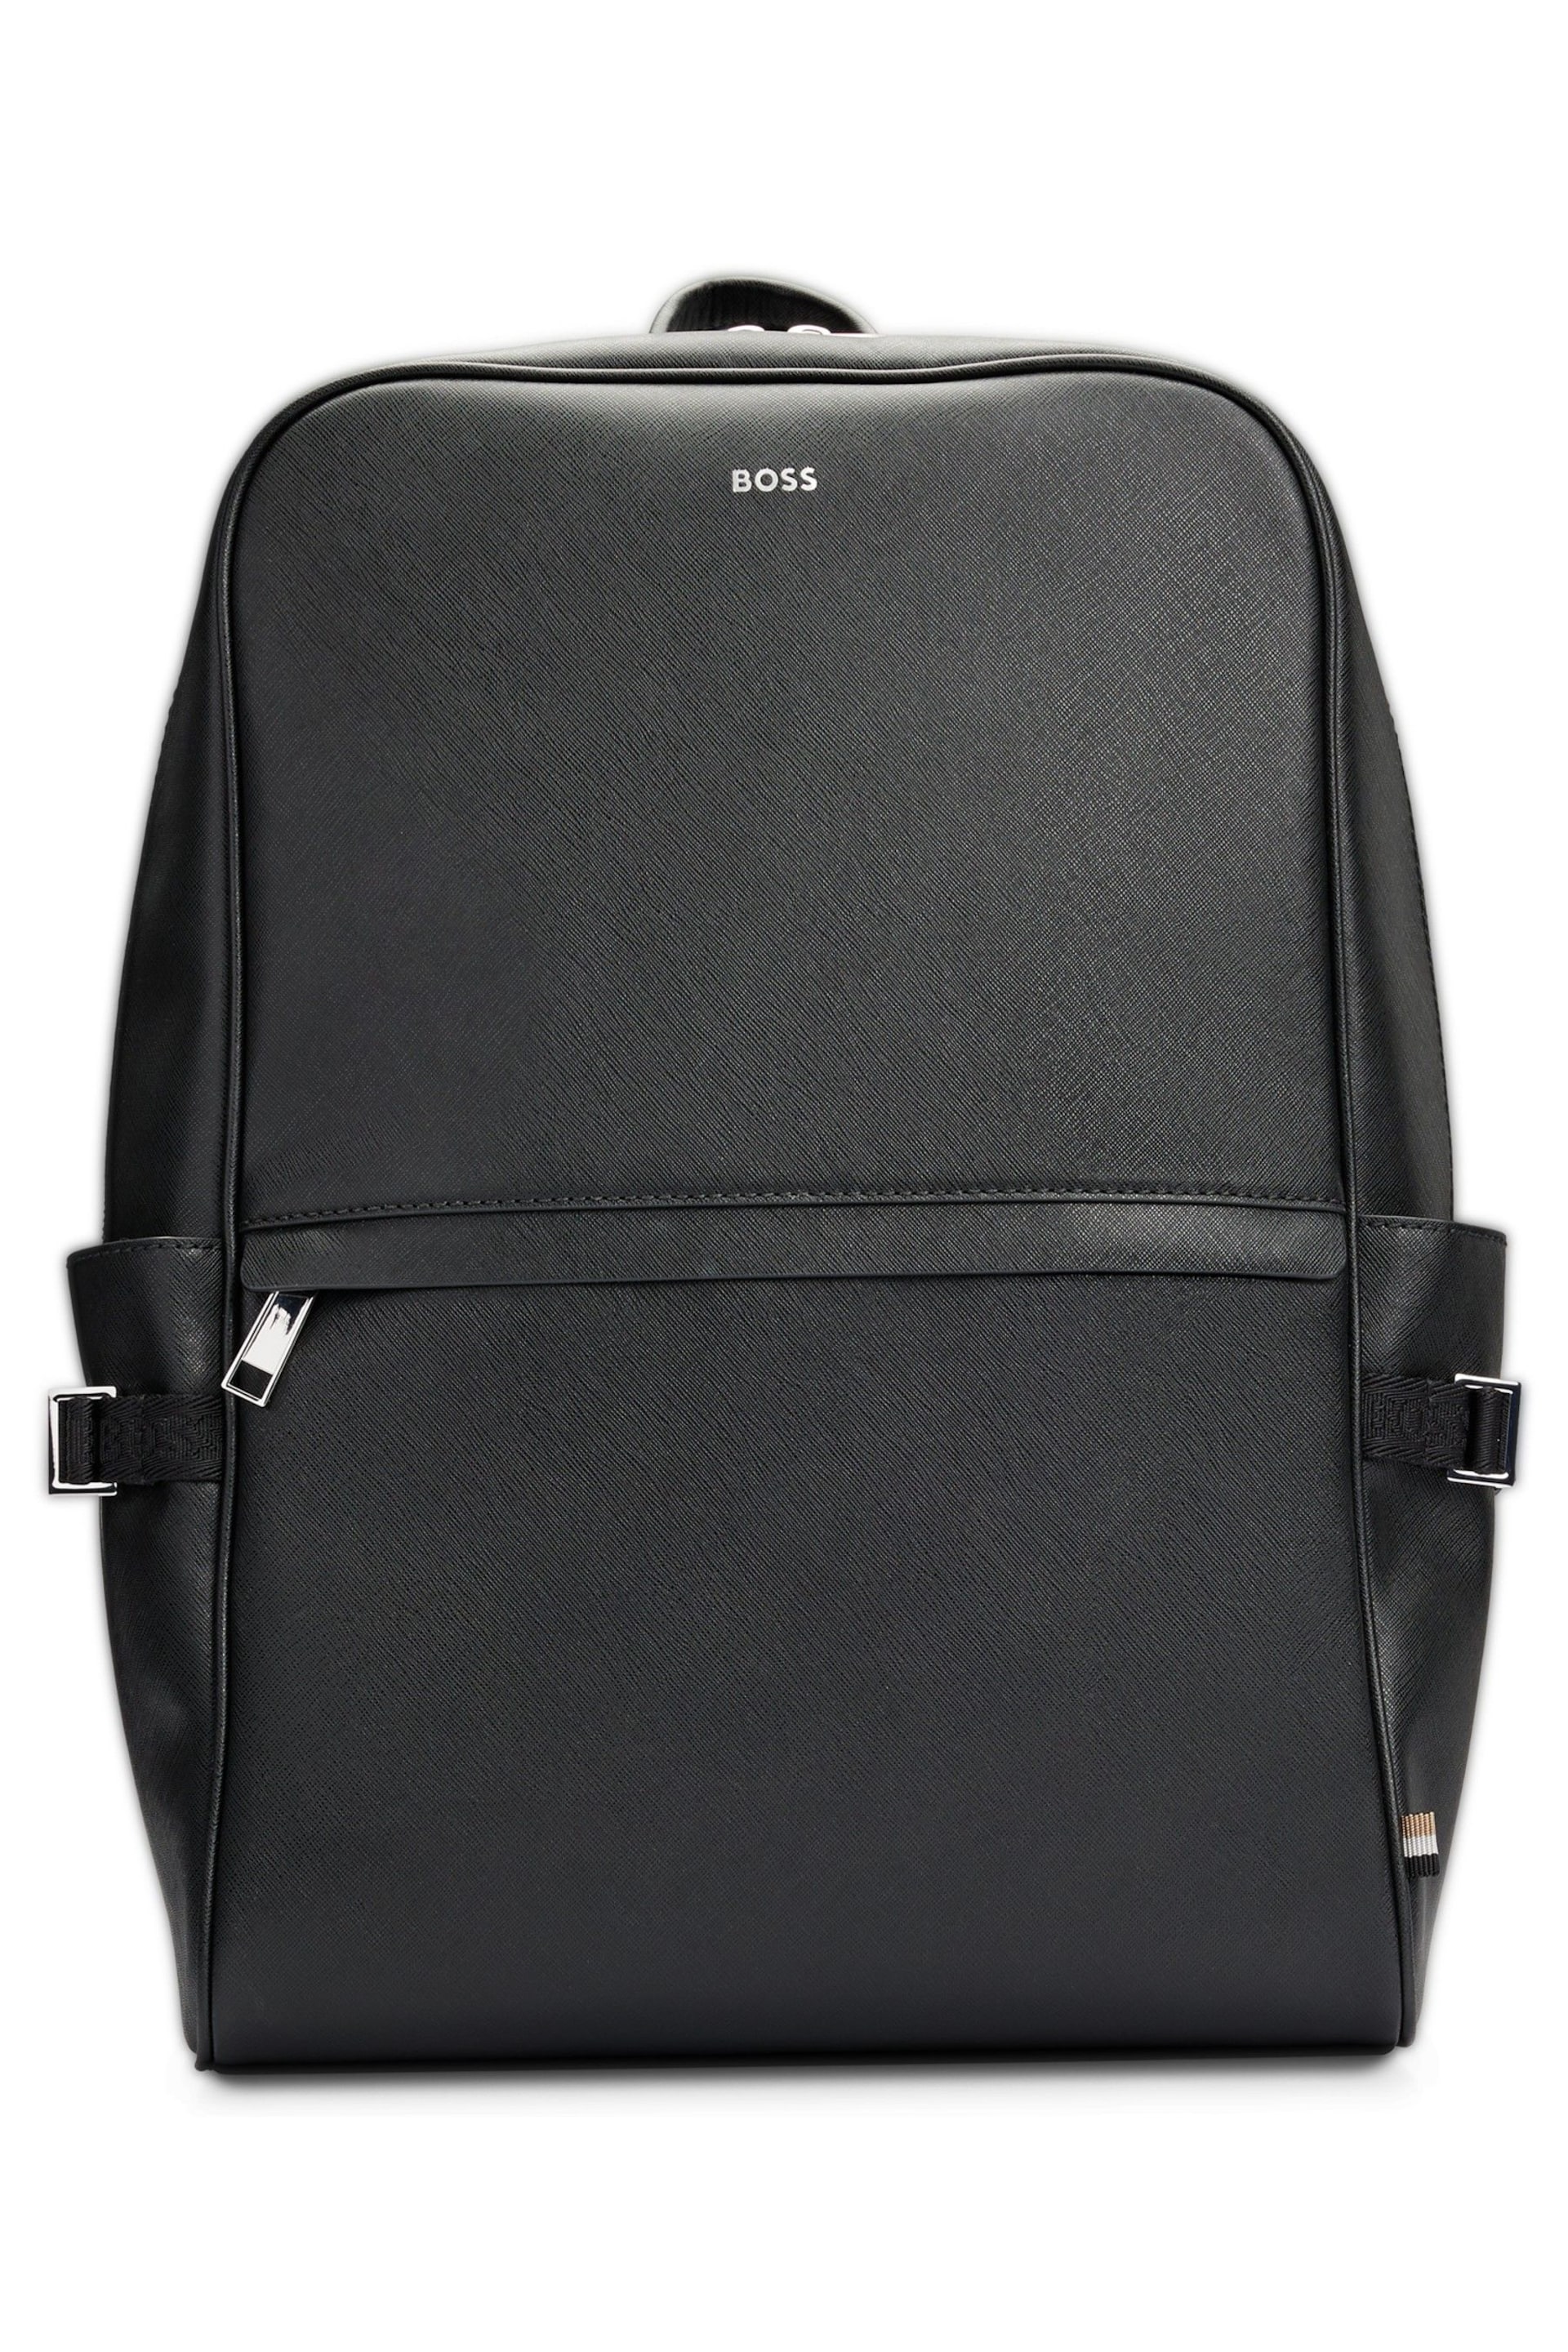 BOSS Black Leather Structured Backpack - Image 3 of 6